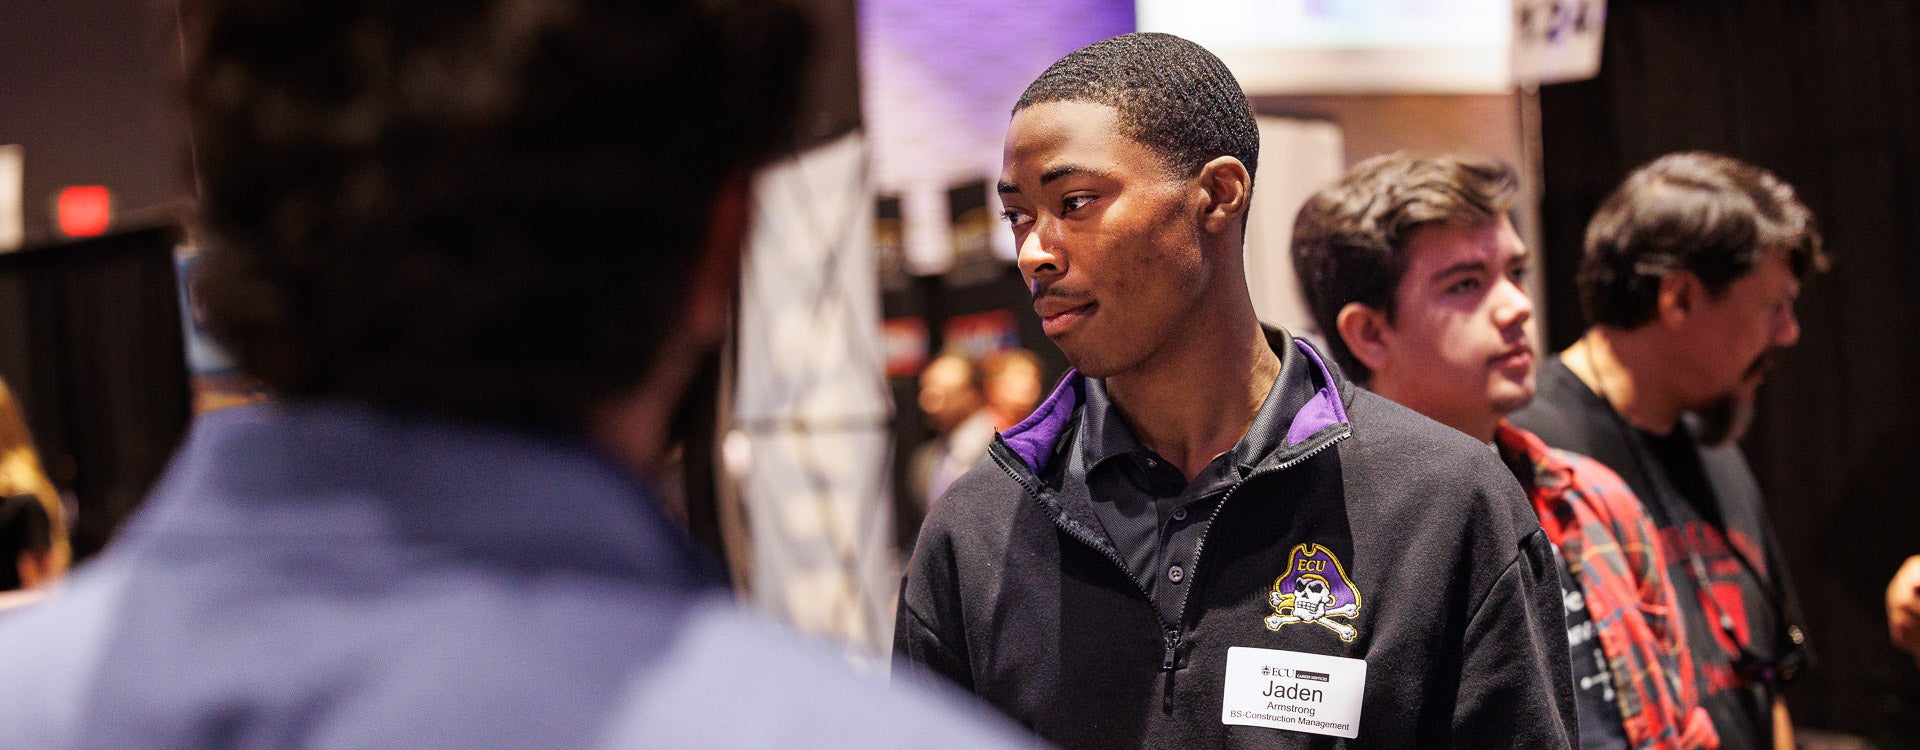 Construction management student Jaden Armstrong meets with employers during the Science, Engineering and Technology Fair Wednesday at the Greenville Convention Center. (Photo by Cliff Hollis)